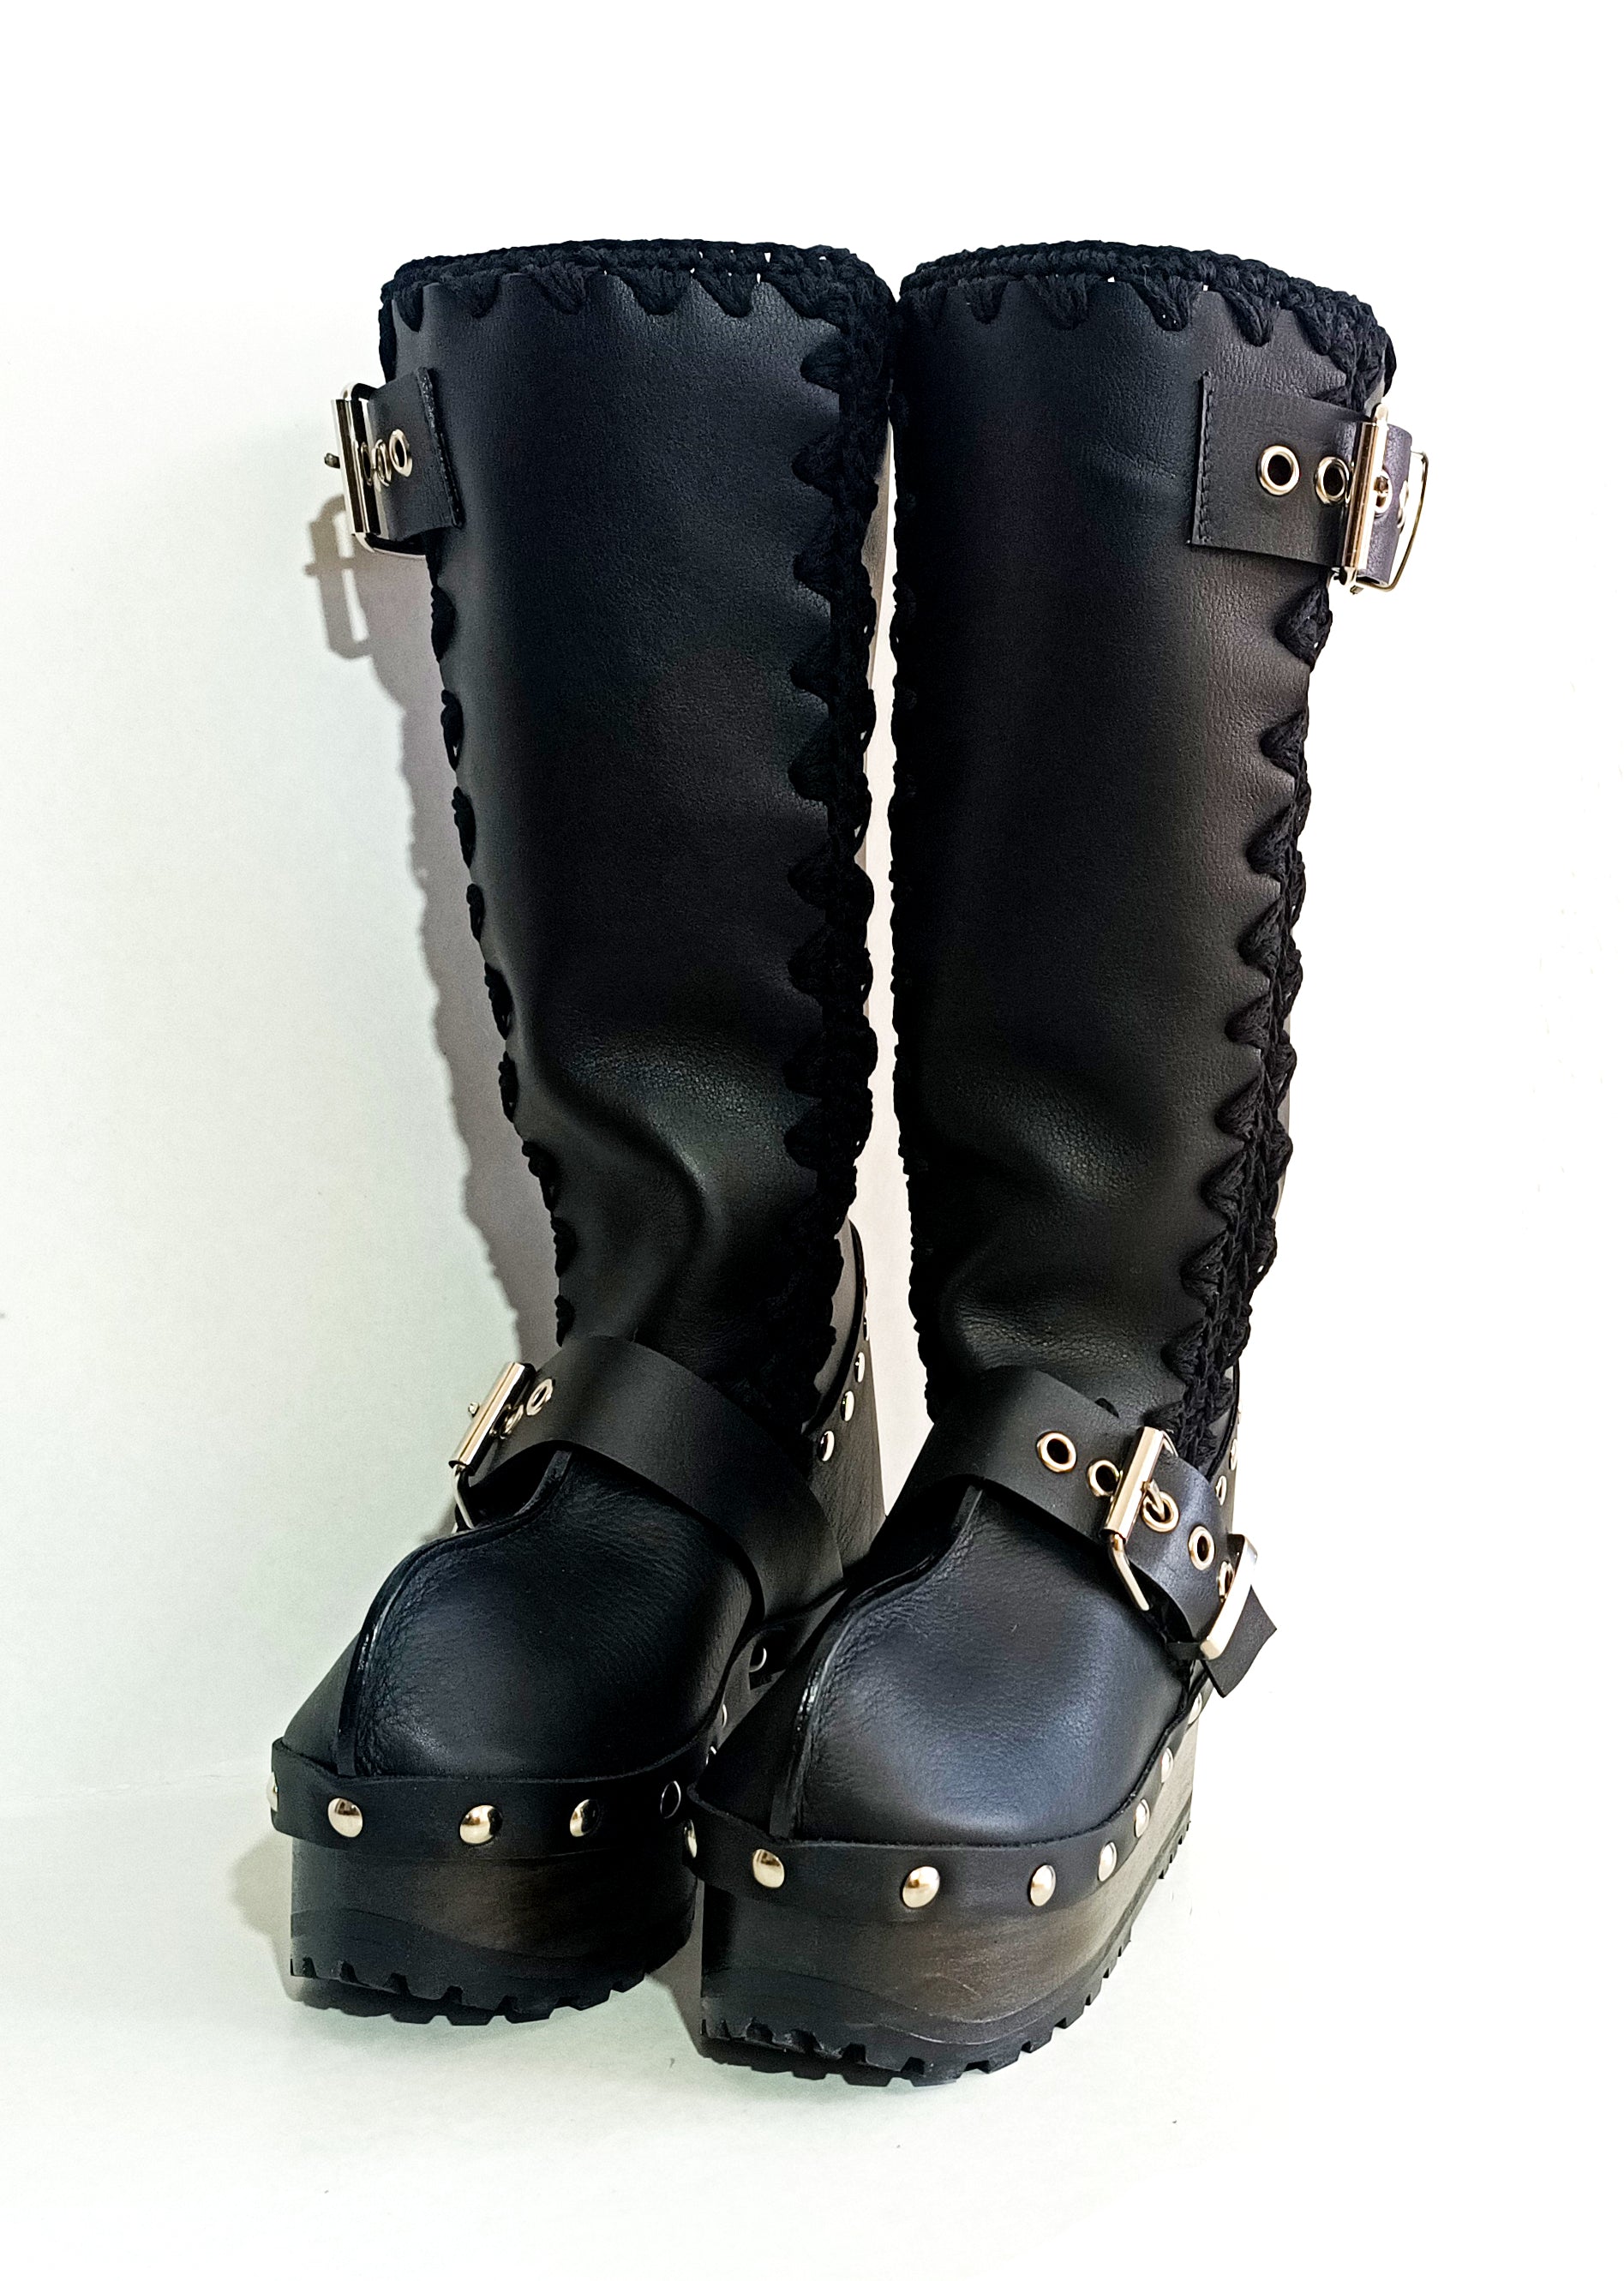 Black leather boots with silver buckles. Leather clog boots. Leather boots with wooden wedge. Vintage style leather boots. Sizes 34 to 47. High quality handmade leather shoes by sol Caleyo. Sustainable fashion.